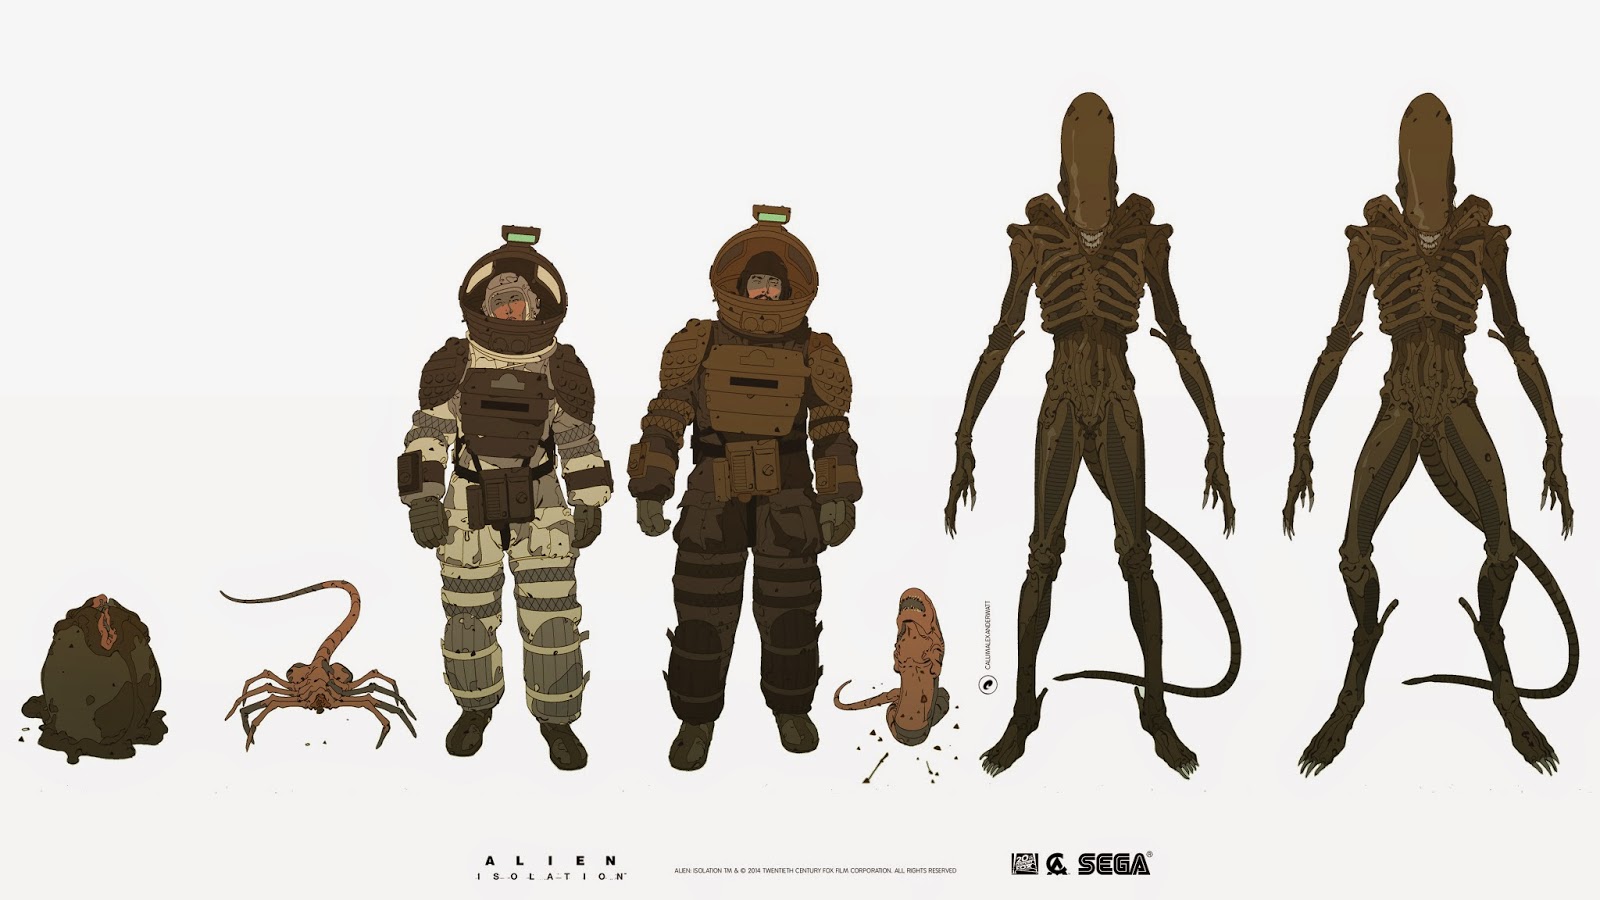 The Best Video Game Concept Art Of 2014*